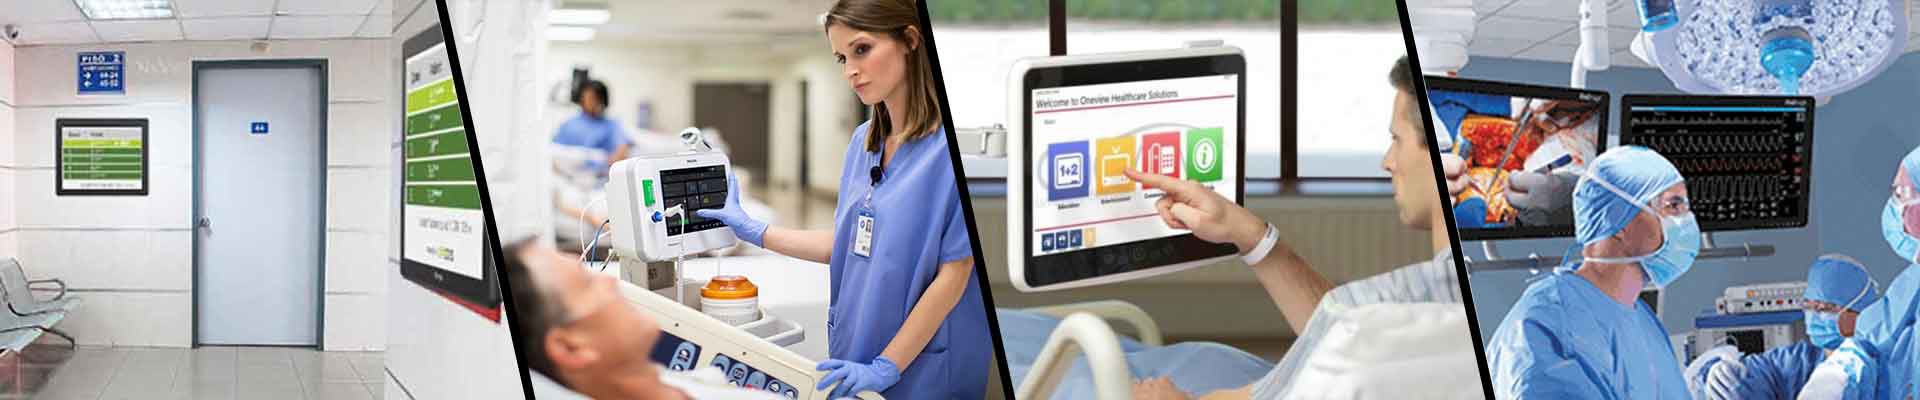 Healthcare LCD displays and all-in-one computer - Inelmatic